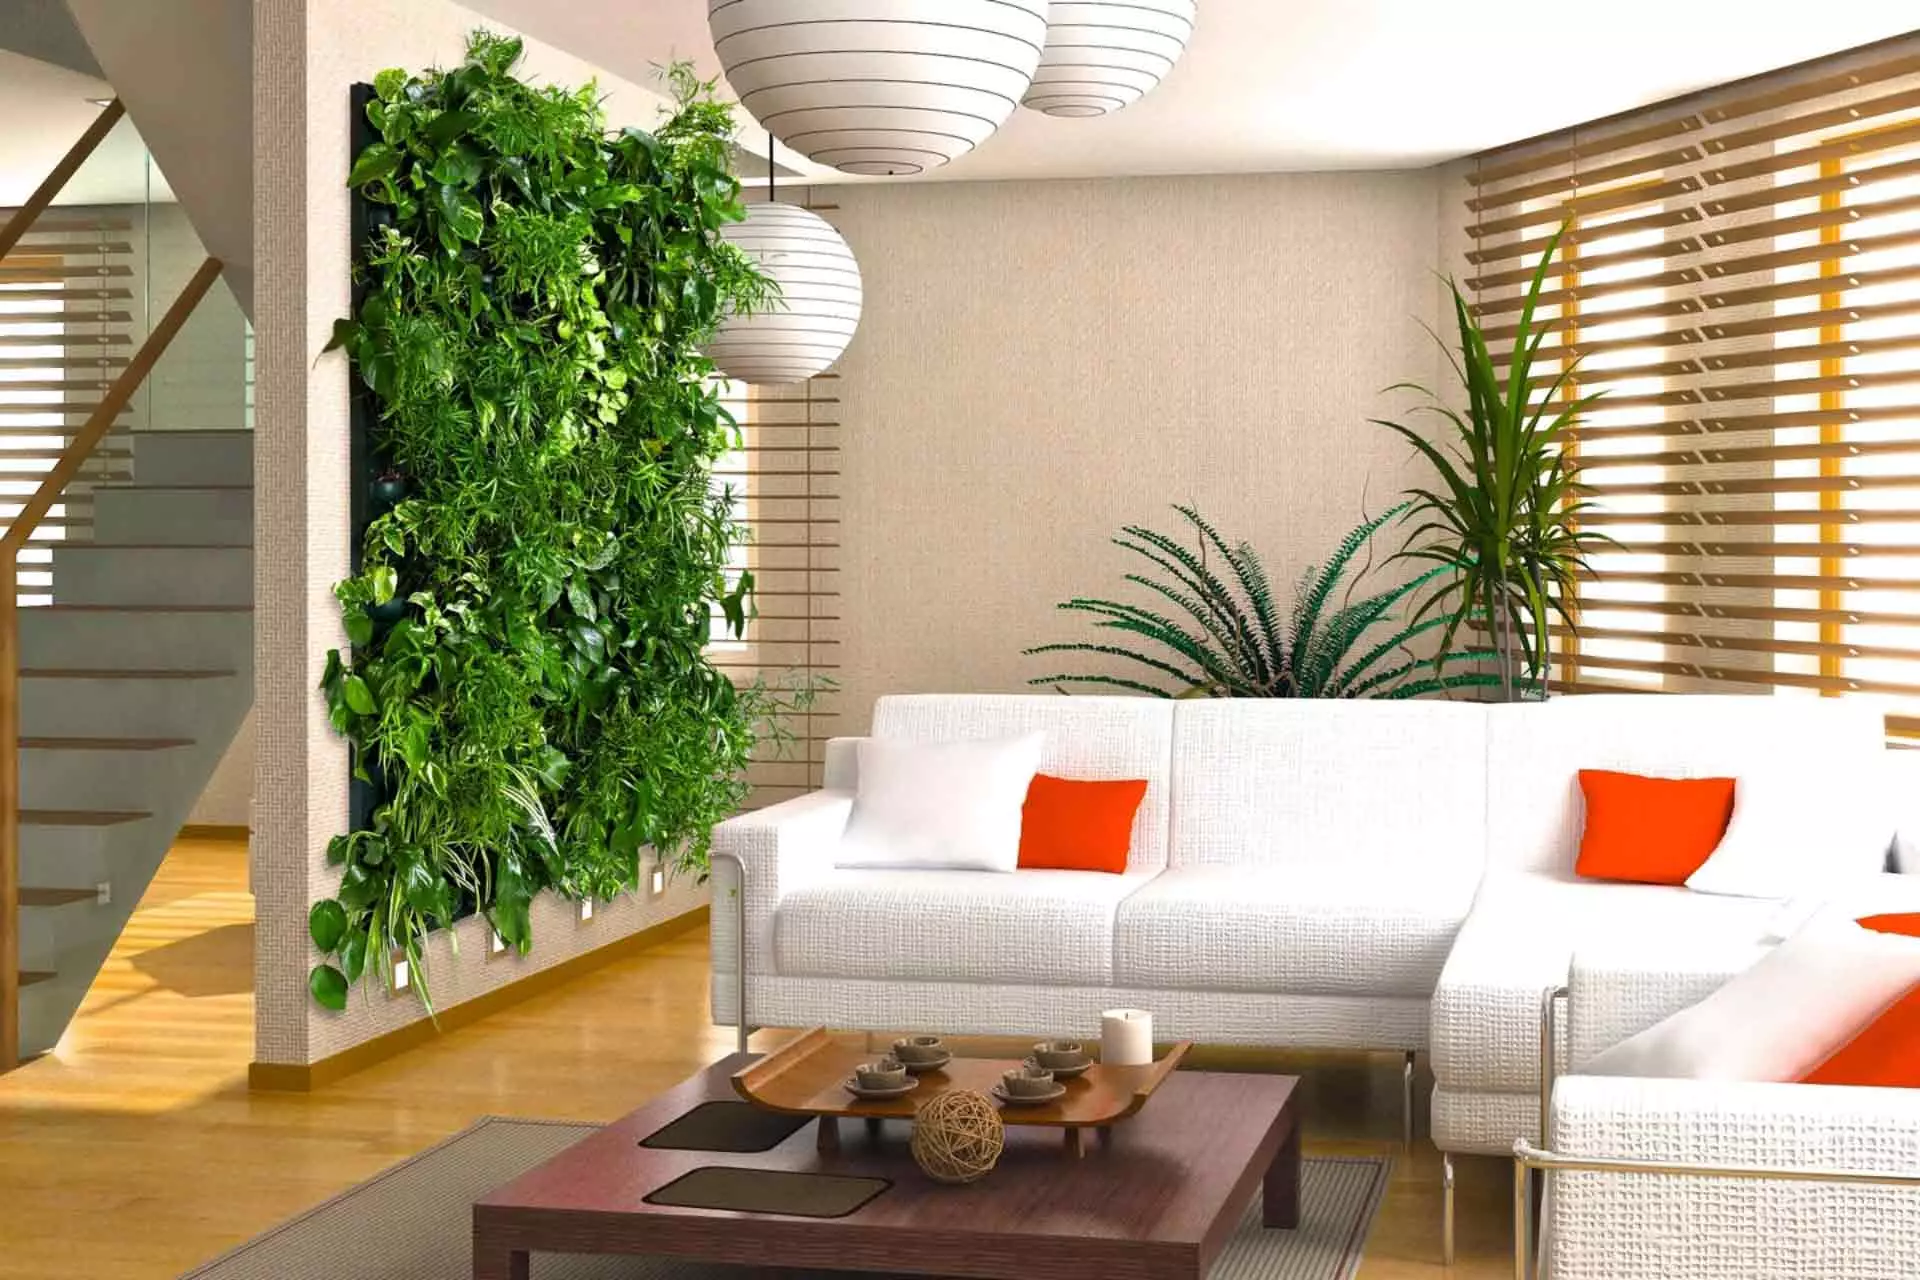 Phytodesign in the interior